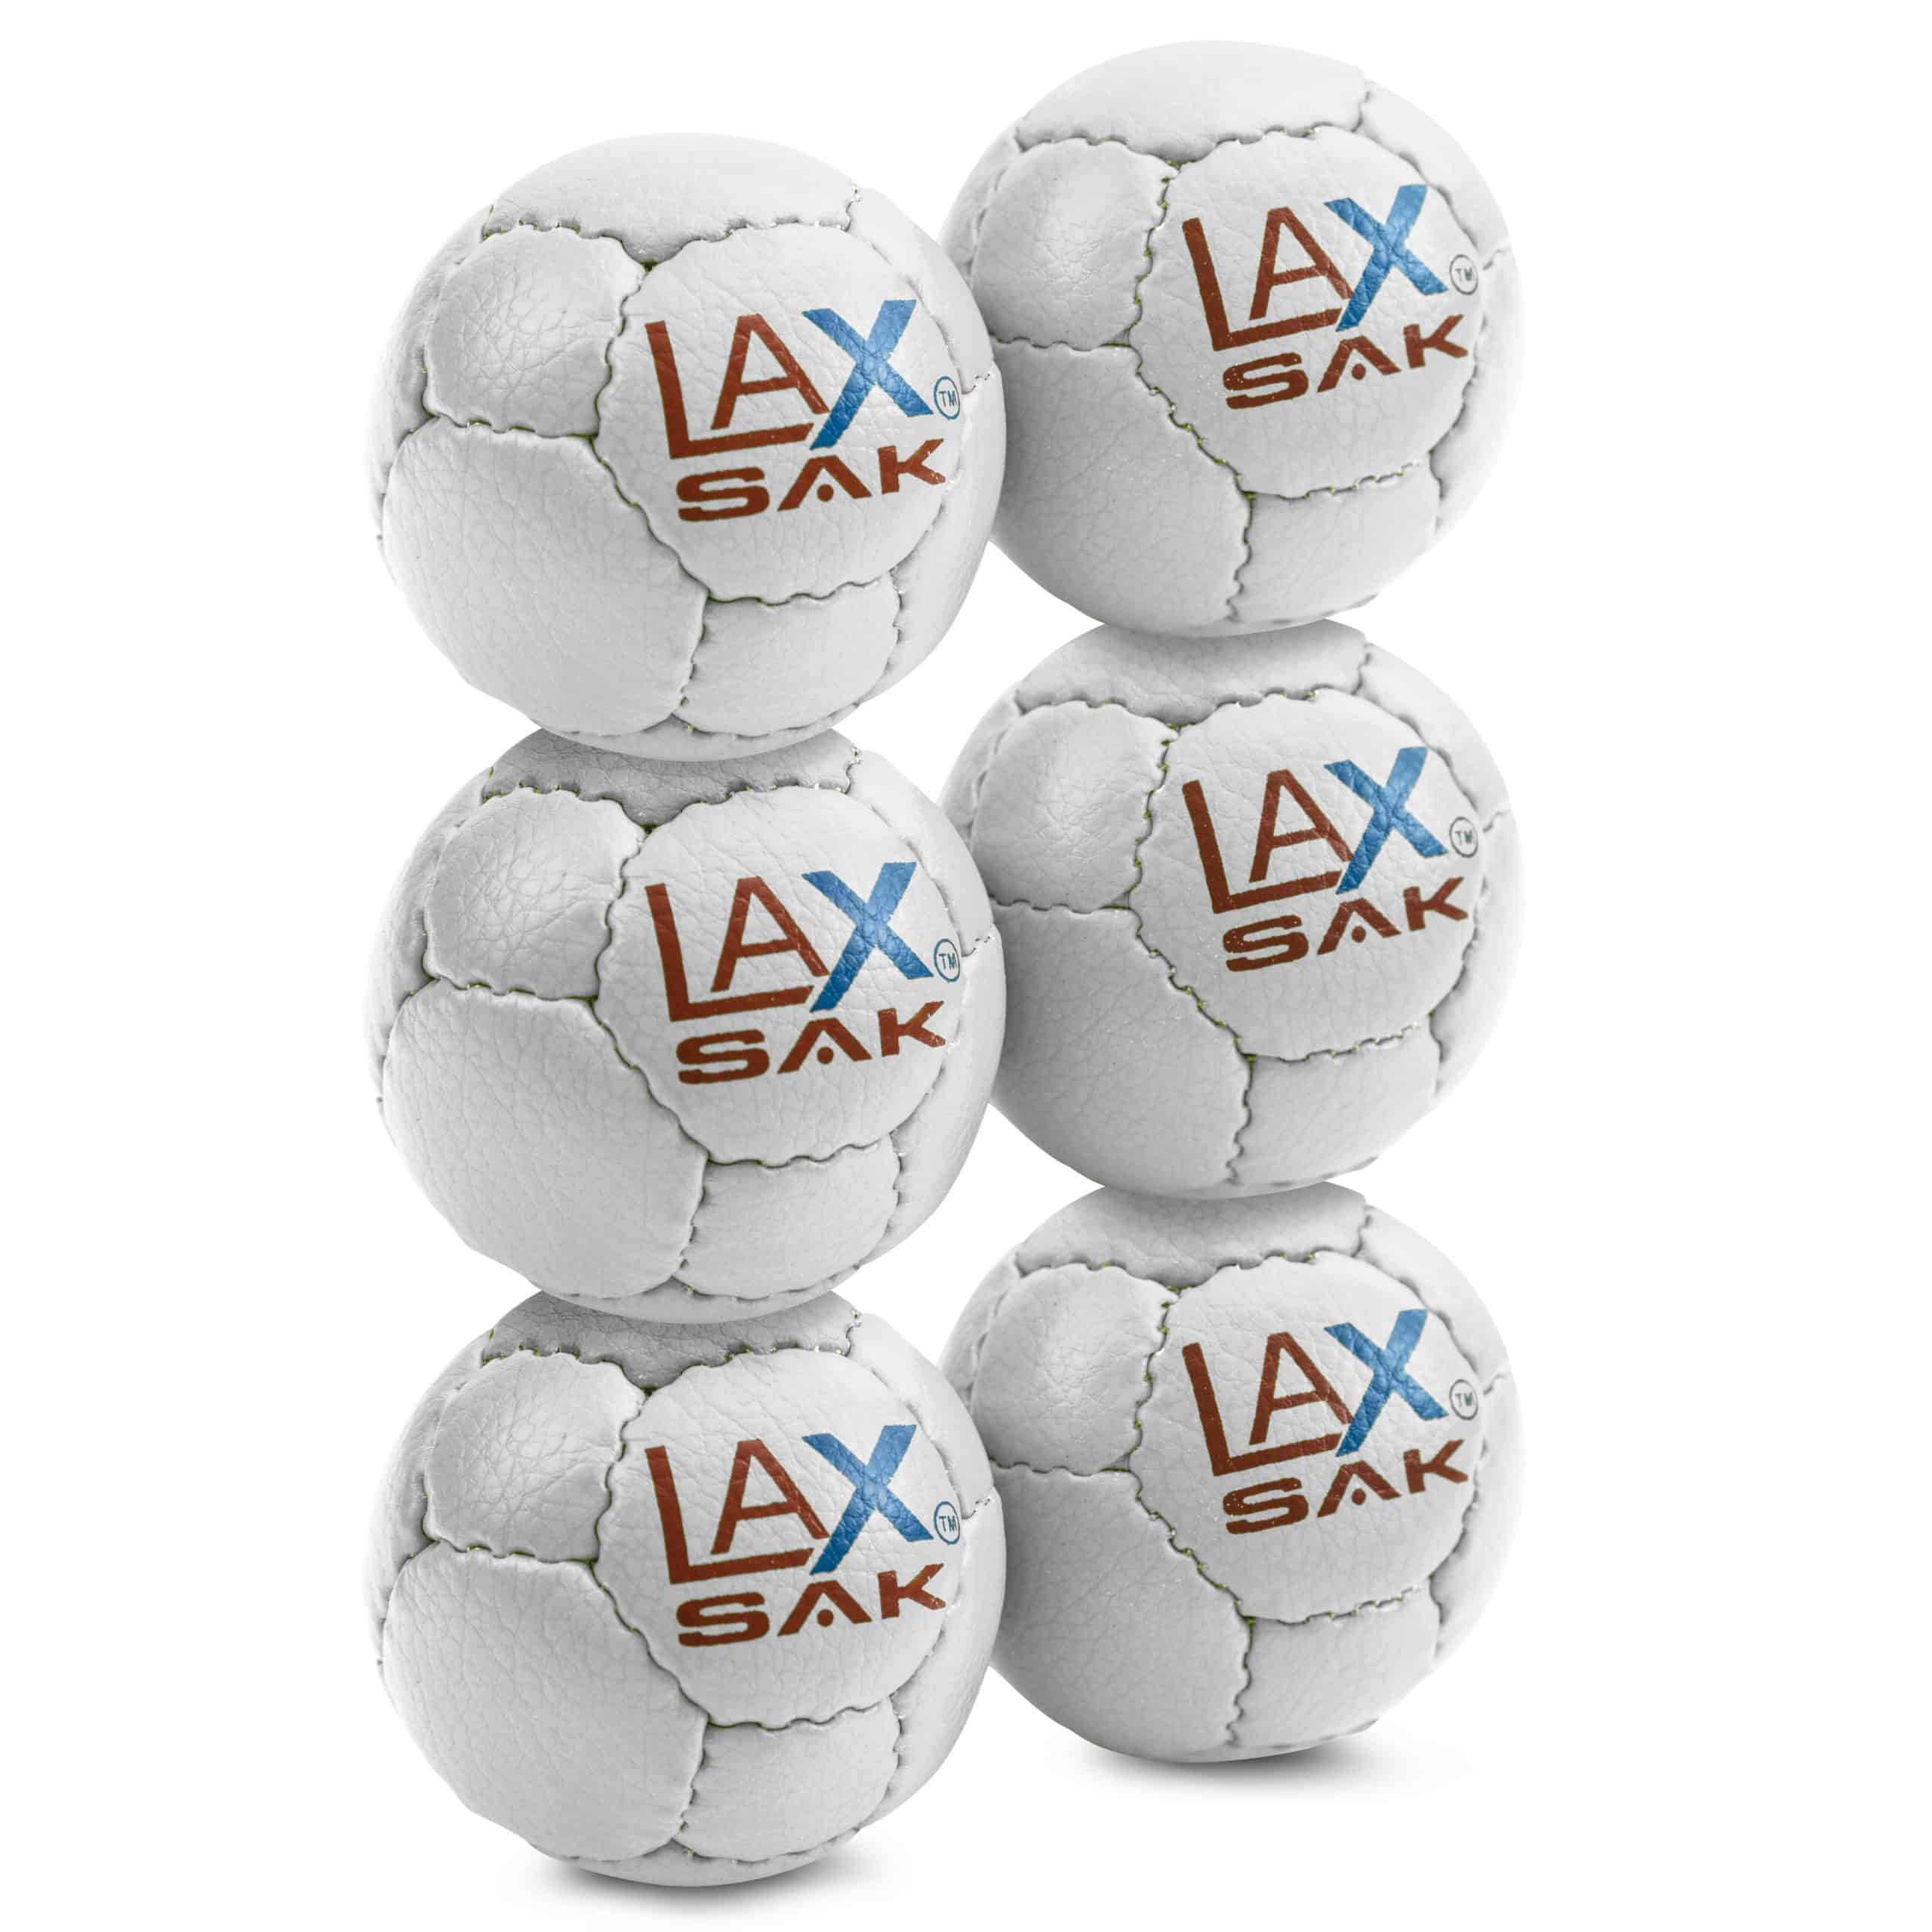 Less Bounce & Minimal Rebounds. Lax Sak 6 Pack Lime Green Lacrosse Training Ball Great for Indoor & Outdoor Practice Same Weight & Size as a Regulation Lacrosse Ball 